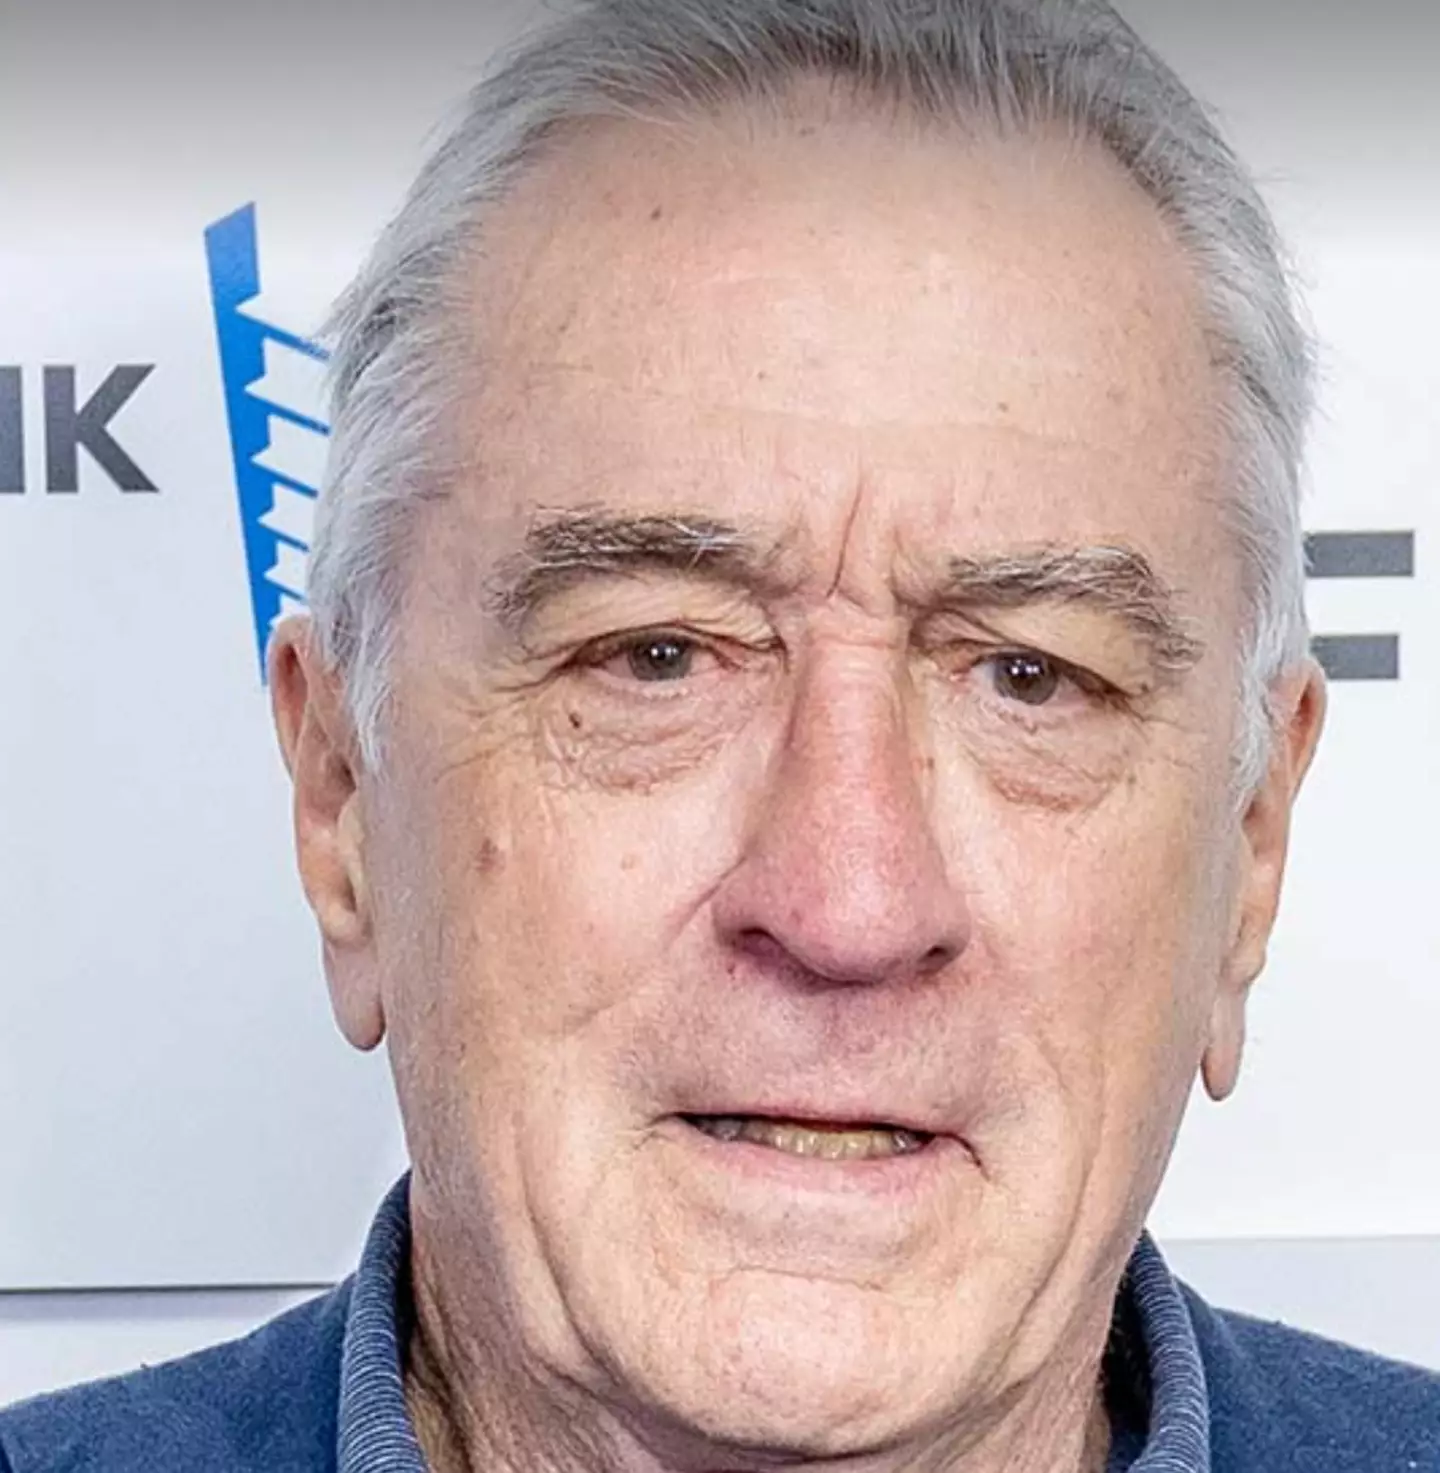 Robert De Niro asked for privacy in the wake of the loss.